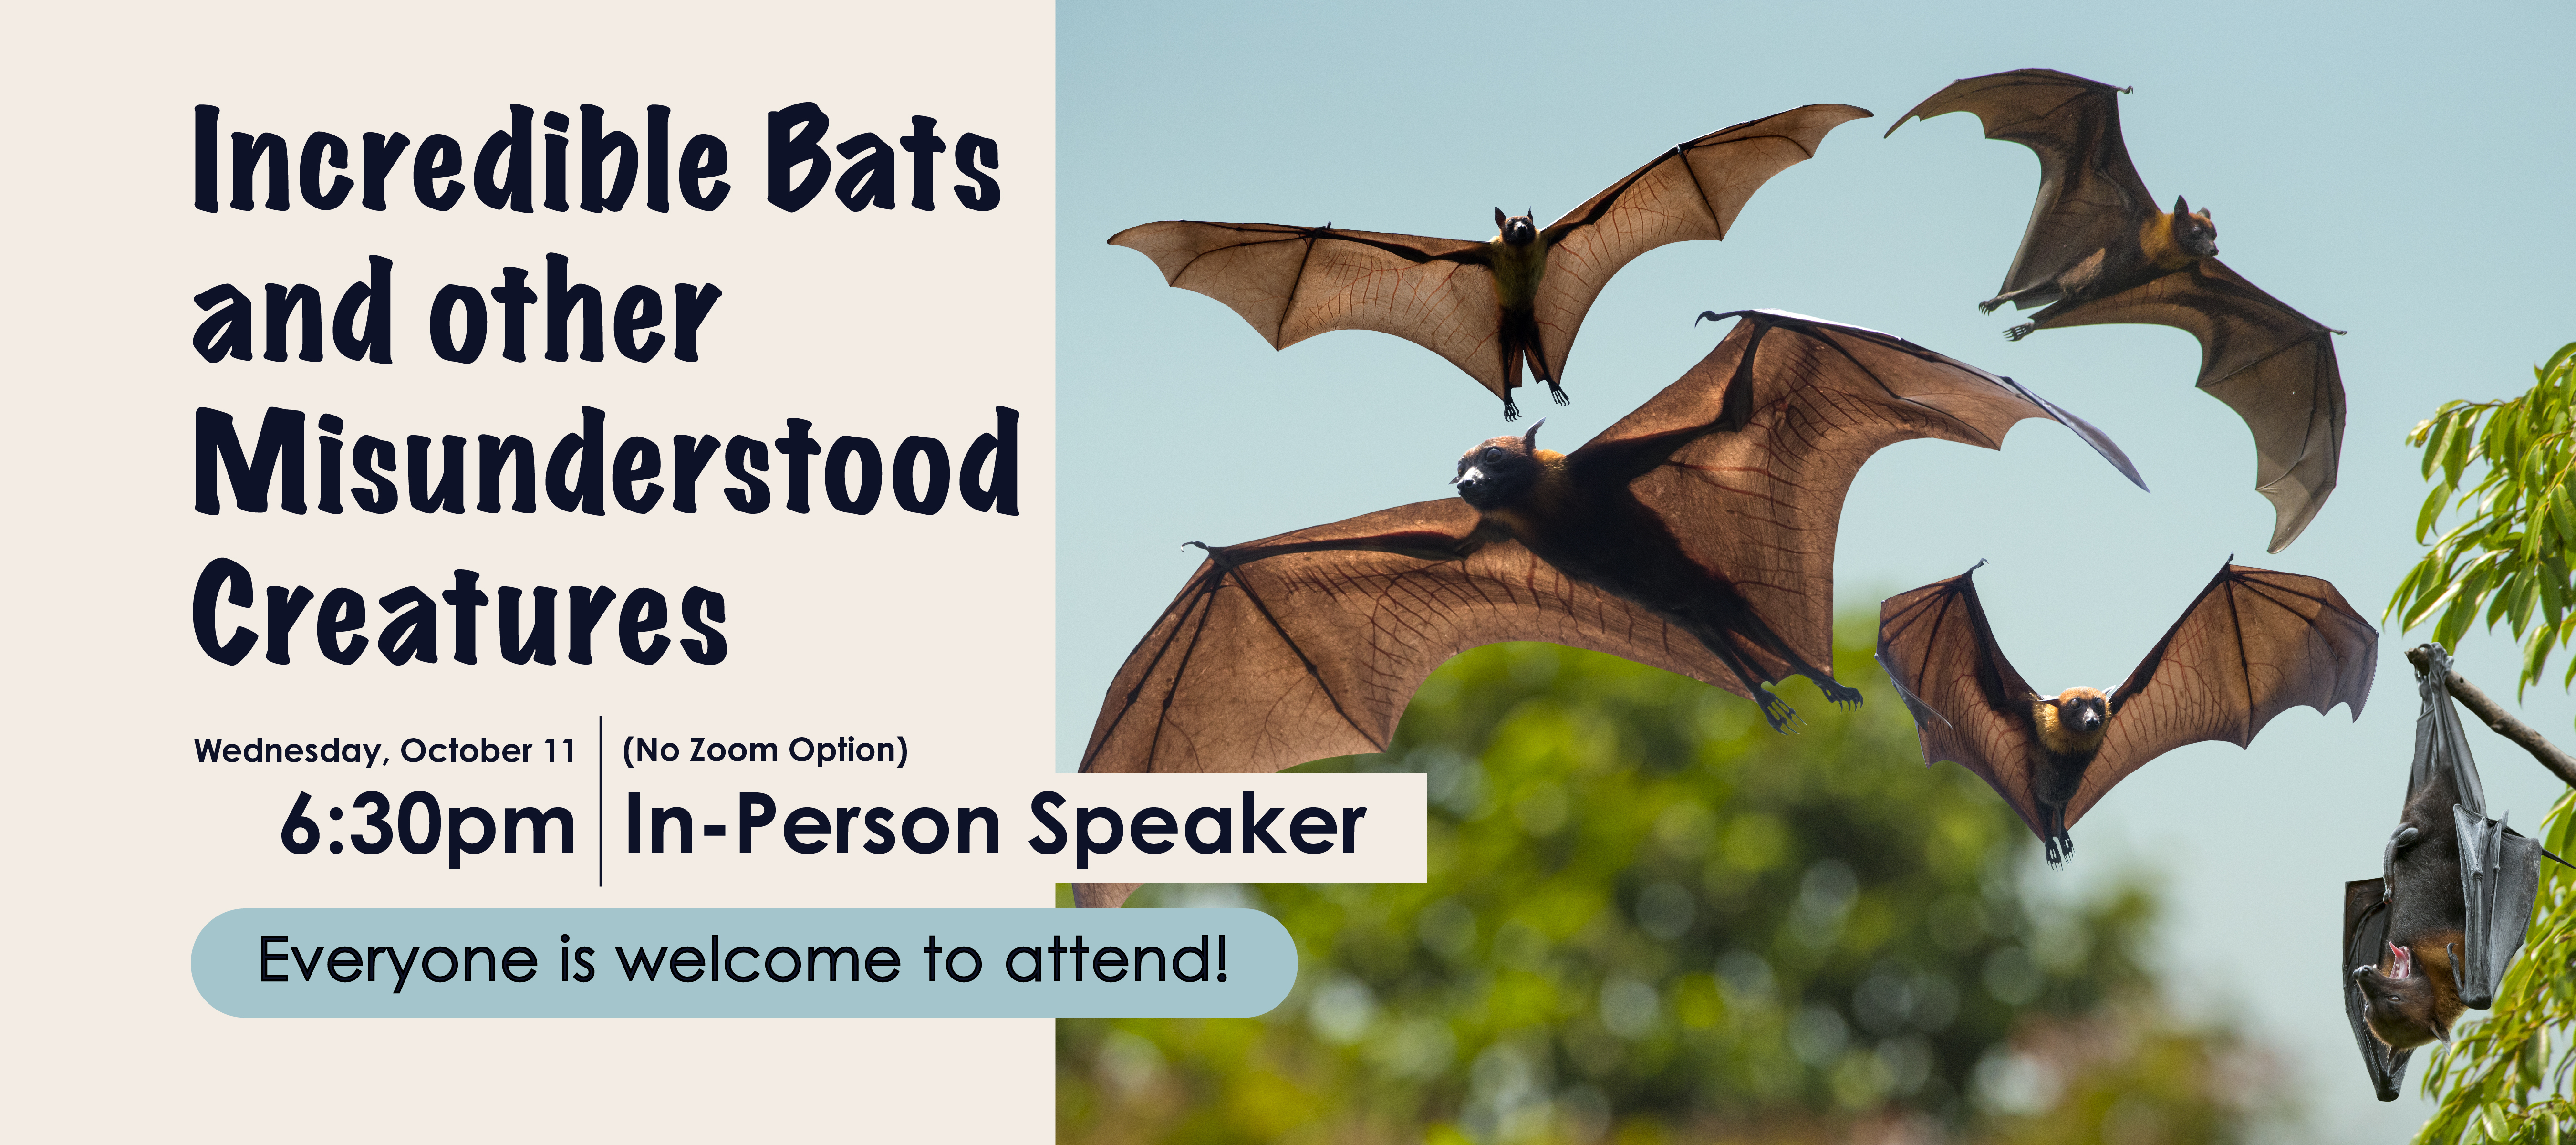 phpl, prospect heights public library, incredible bats and other misunderstood creatures